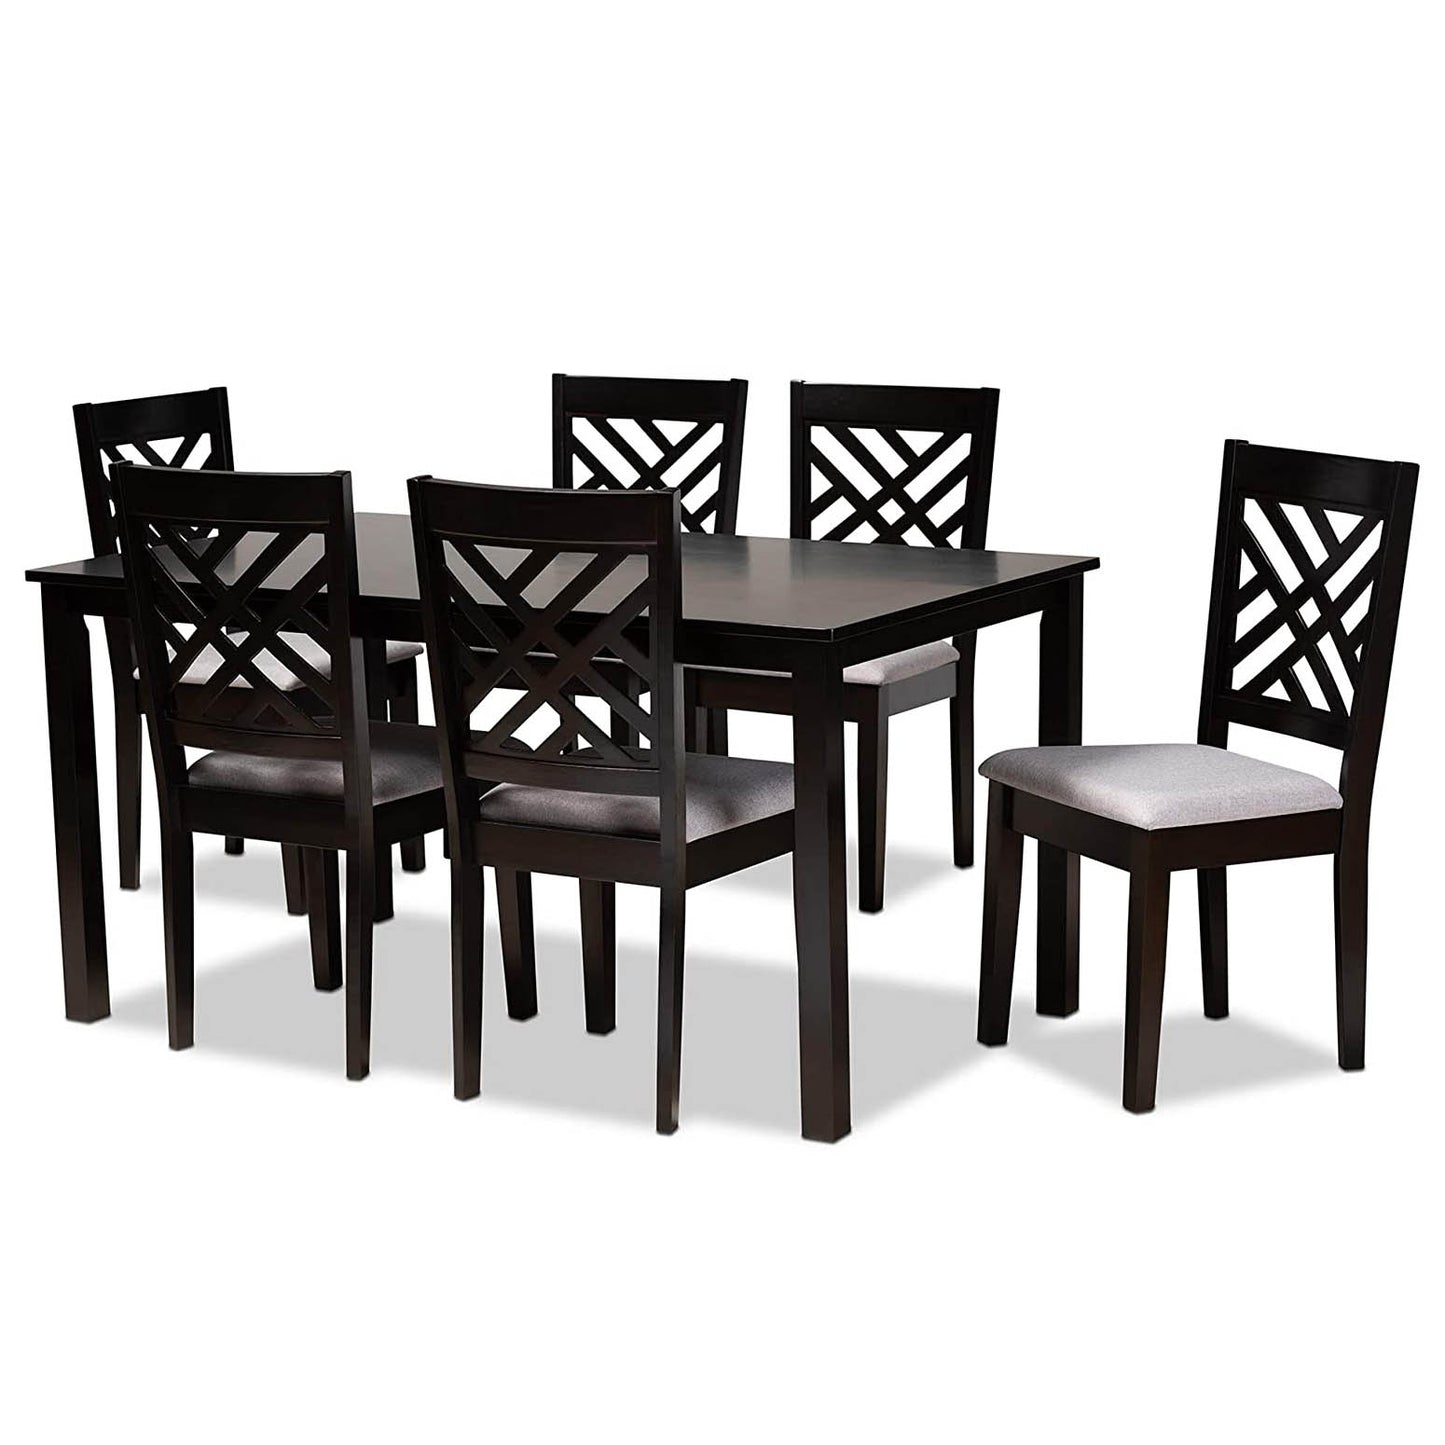 Dining table with 6 chairs - MES170